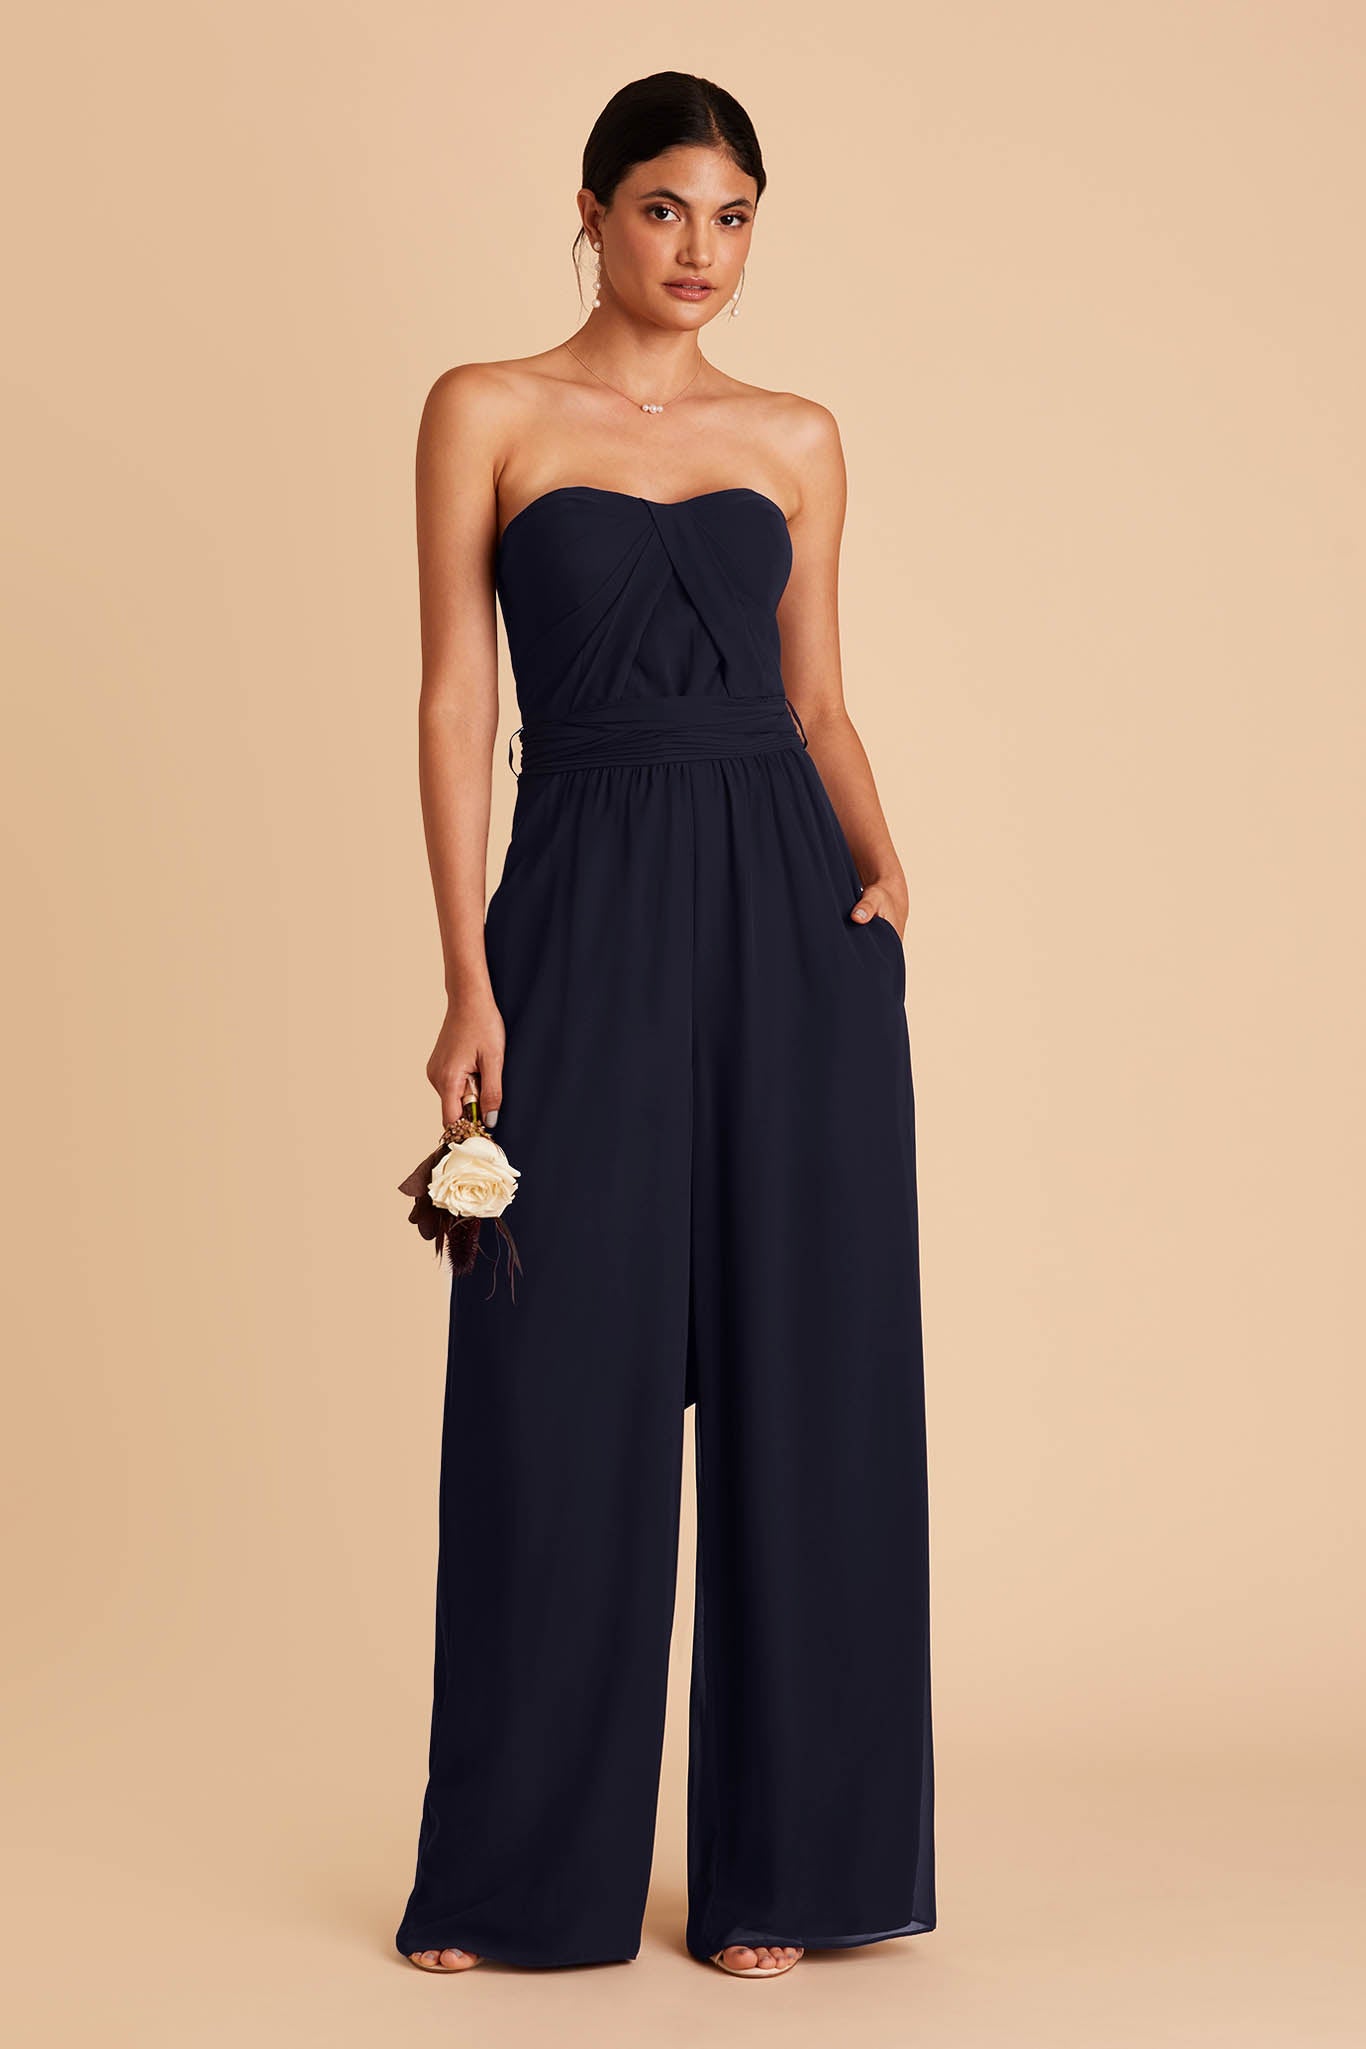 Navy blue wedding jumpsuit with sweetheart bodice with convertible neckline